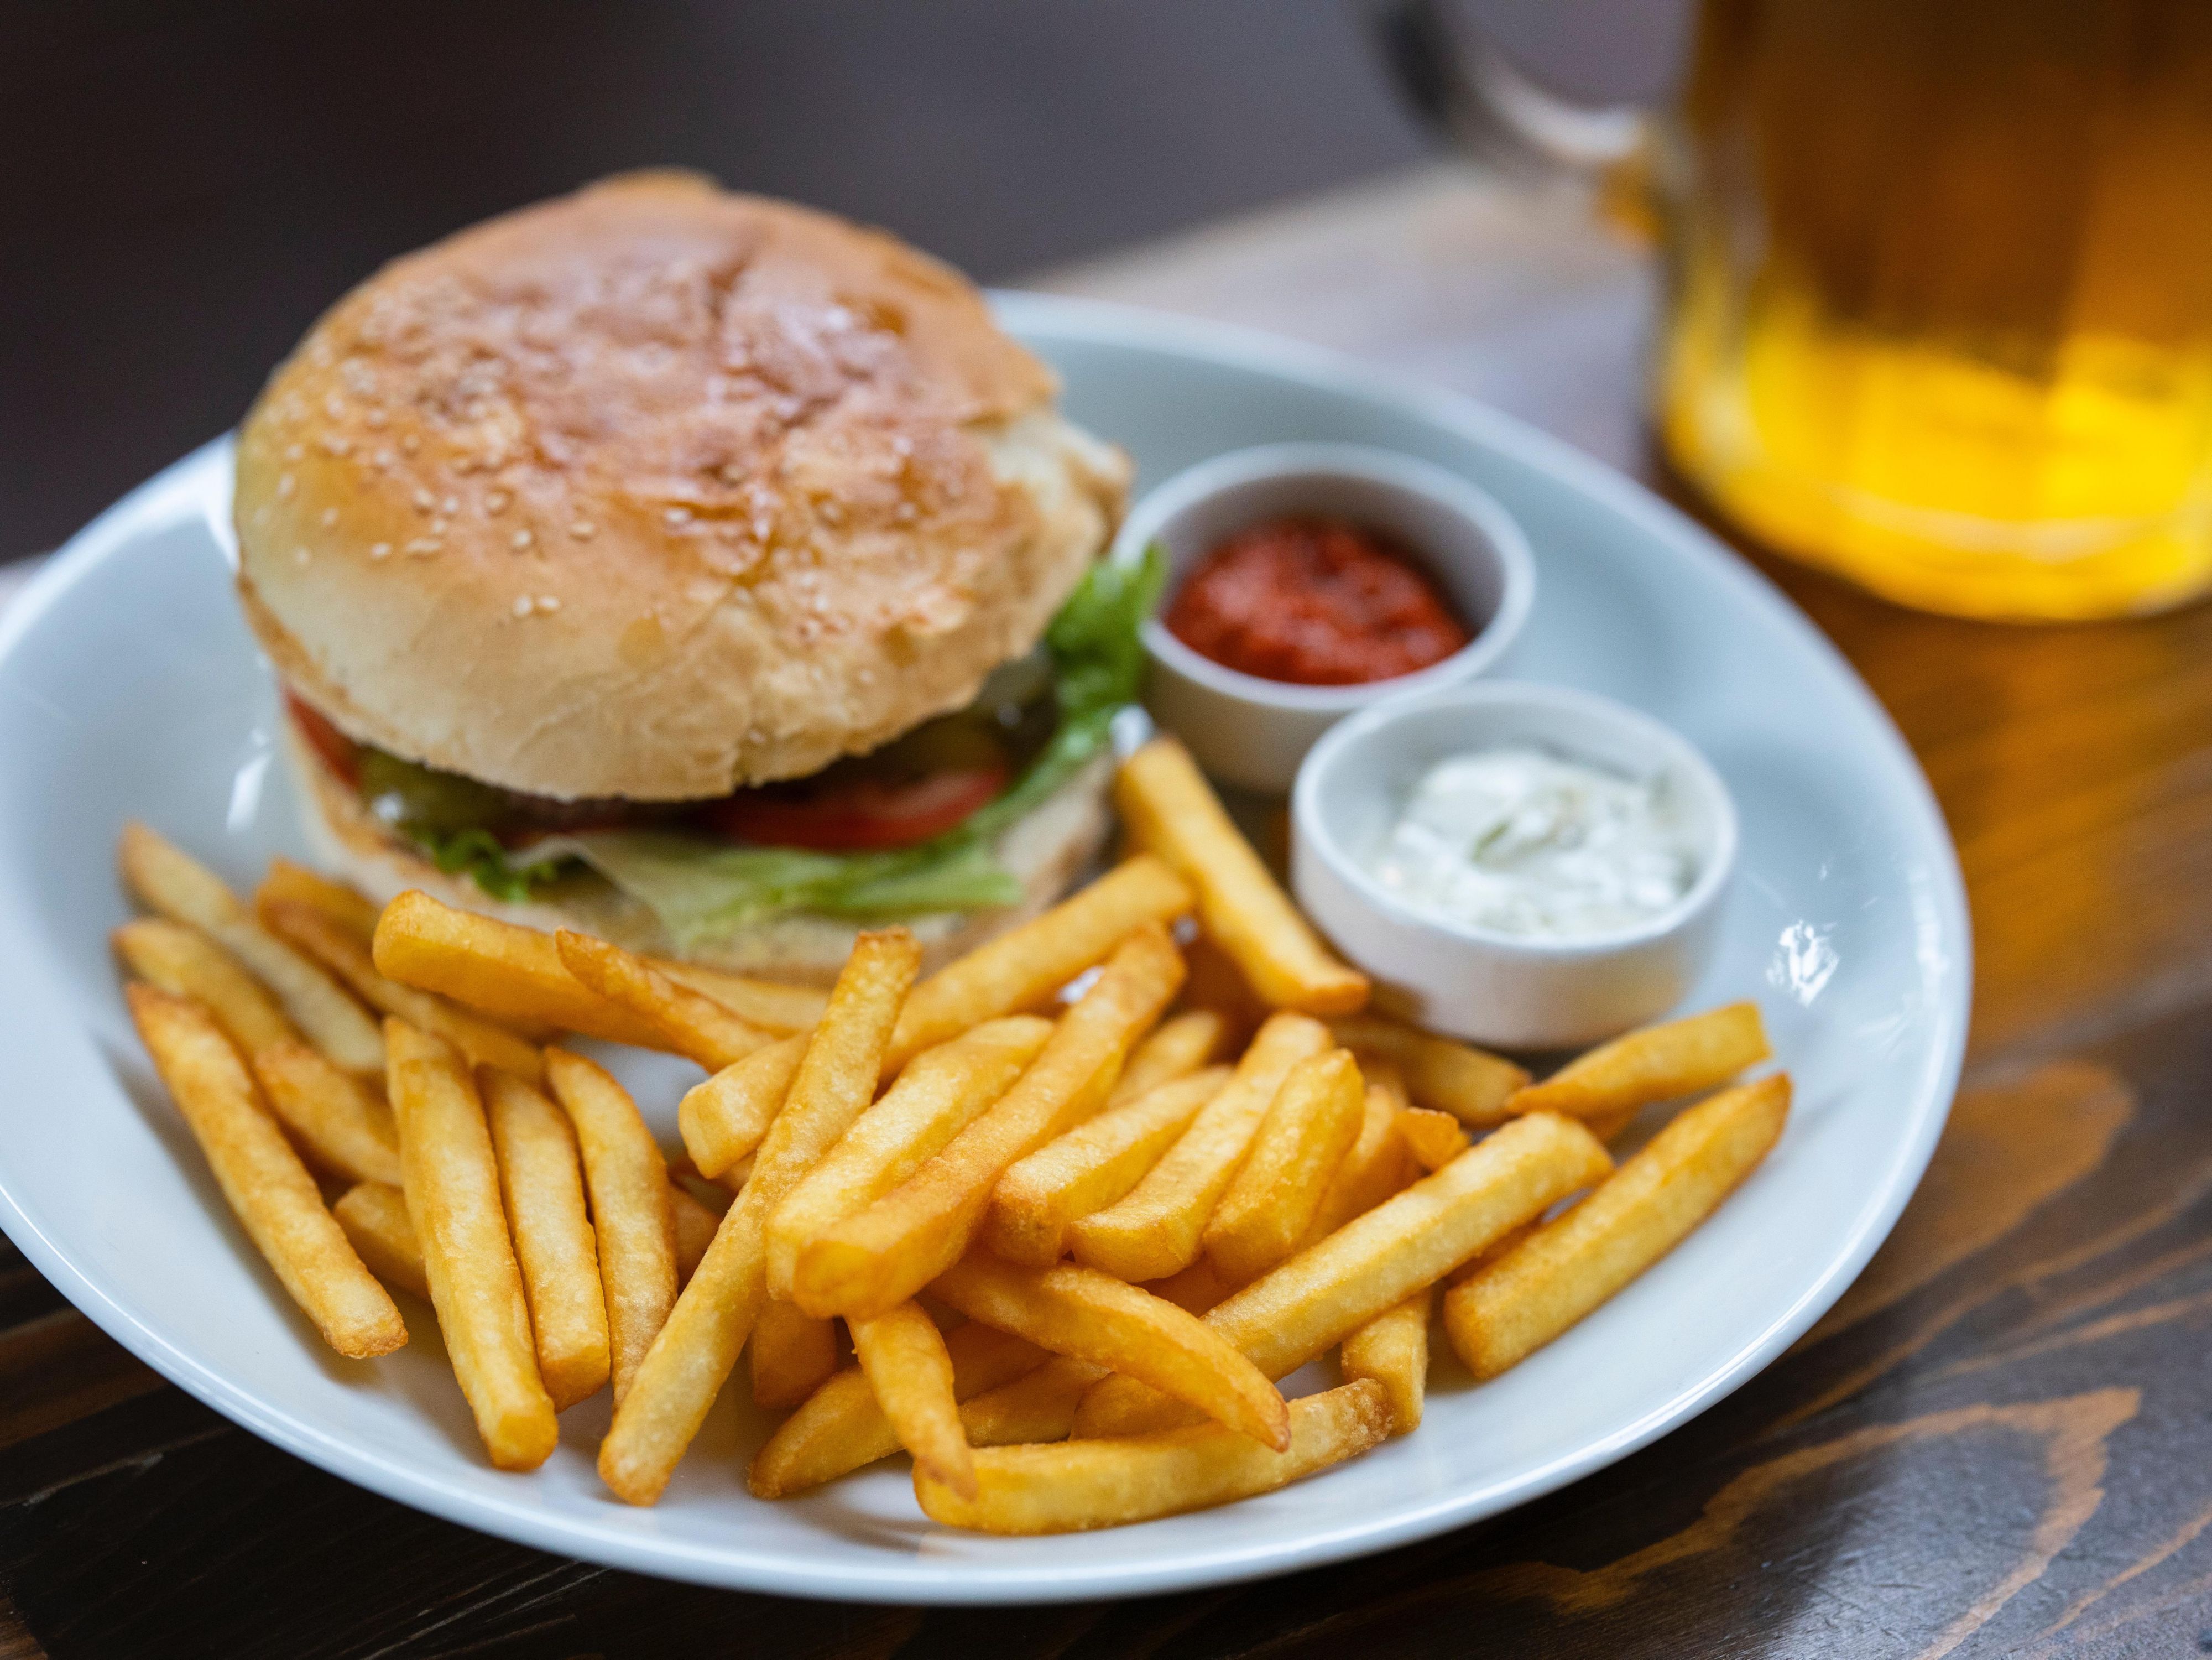 Grab a burger and some fries while watching the game at Carter’s Grill in Ardmore. We offer a cozy grill and bar featuring a variety of great foods, that is sure to meet your needs!